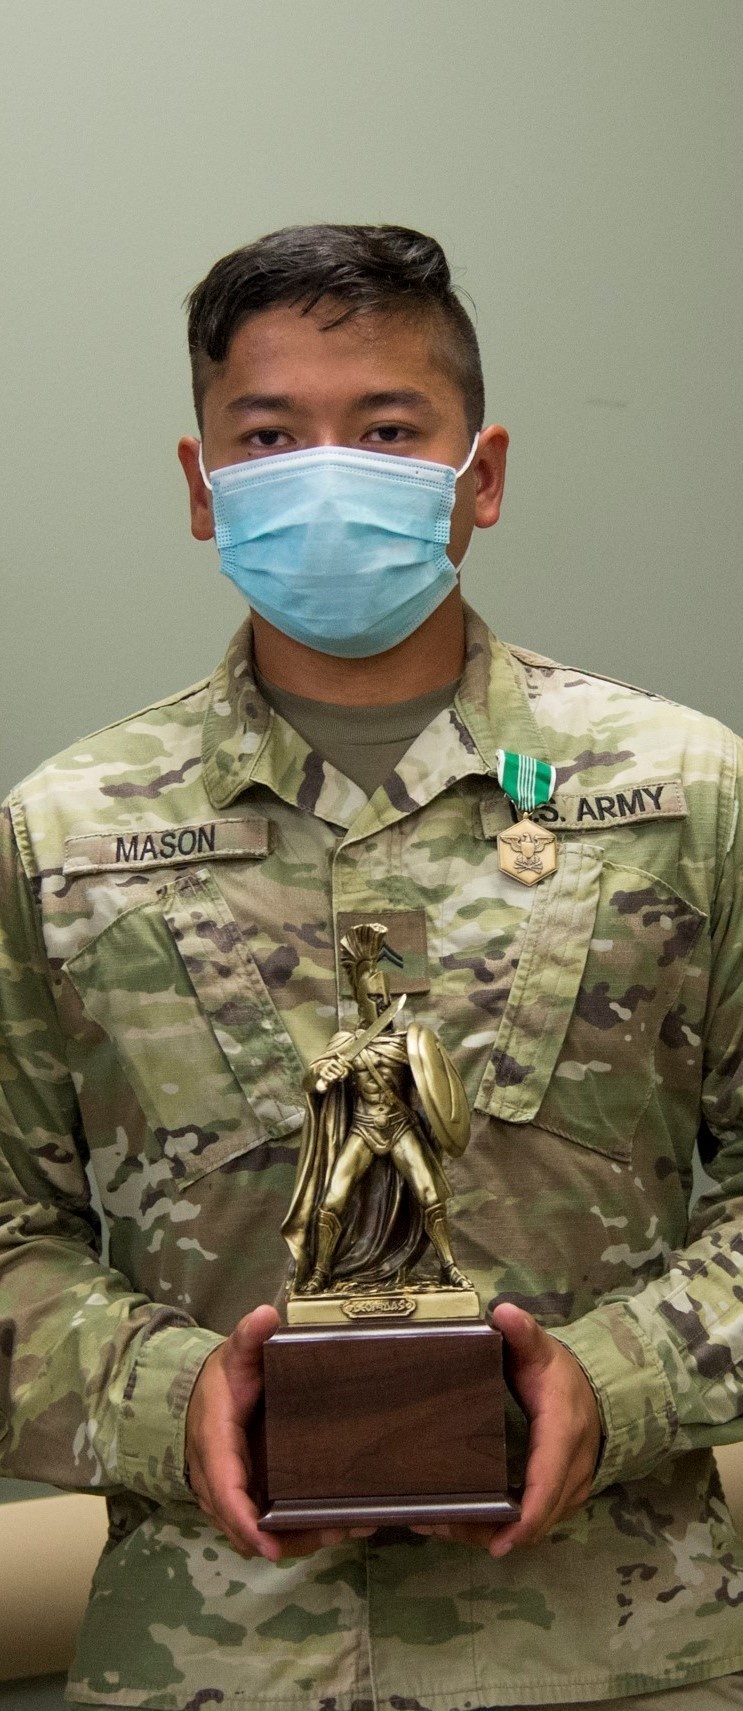 2020 Ohio Army National Guard Soldier of the Year: Cpl. Dauren Mason